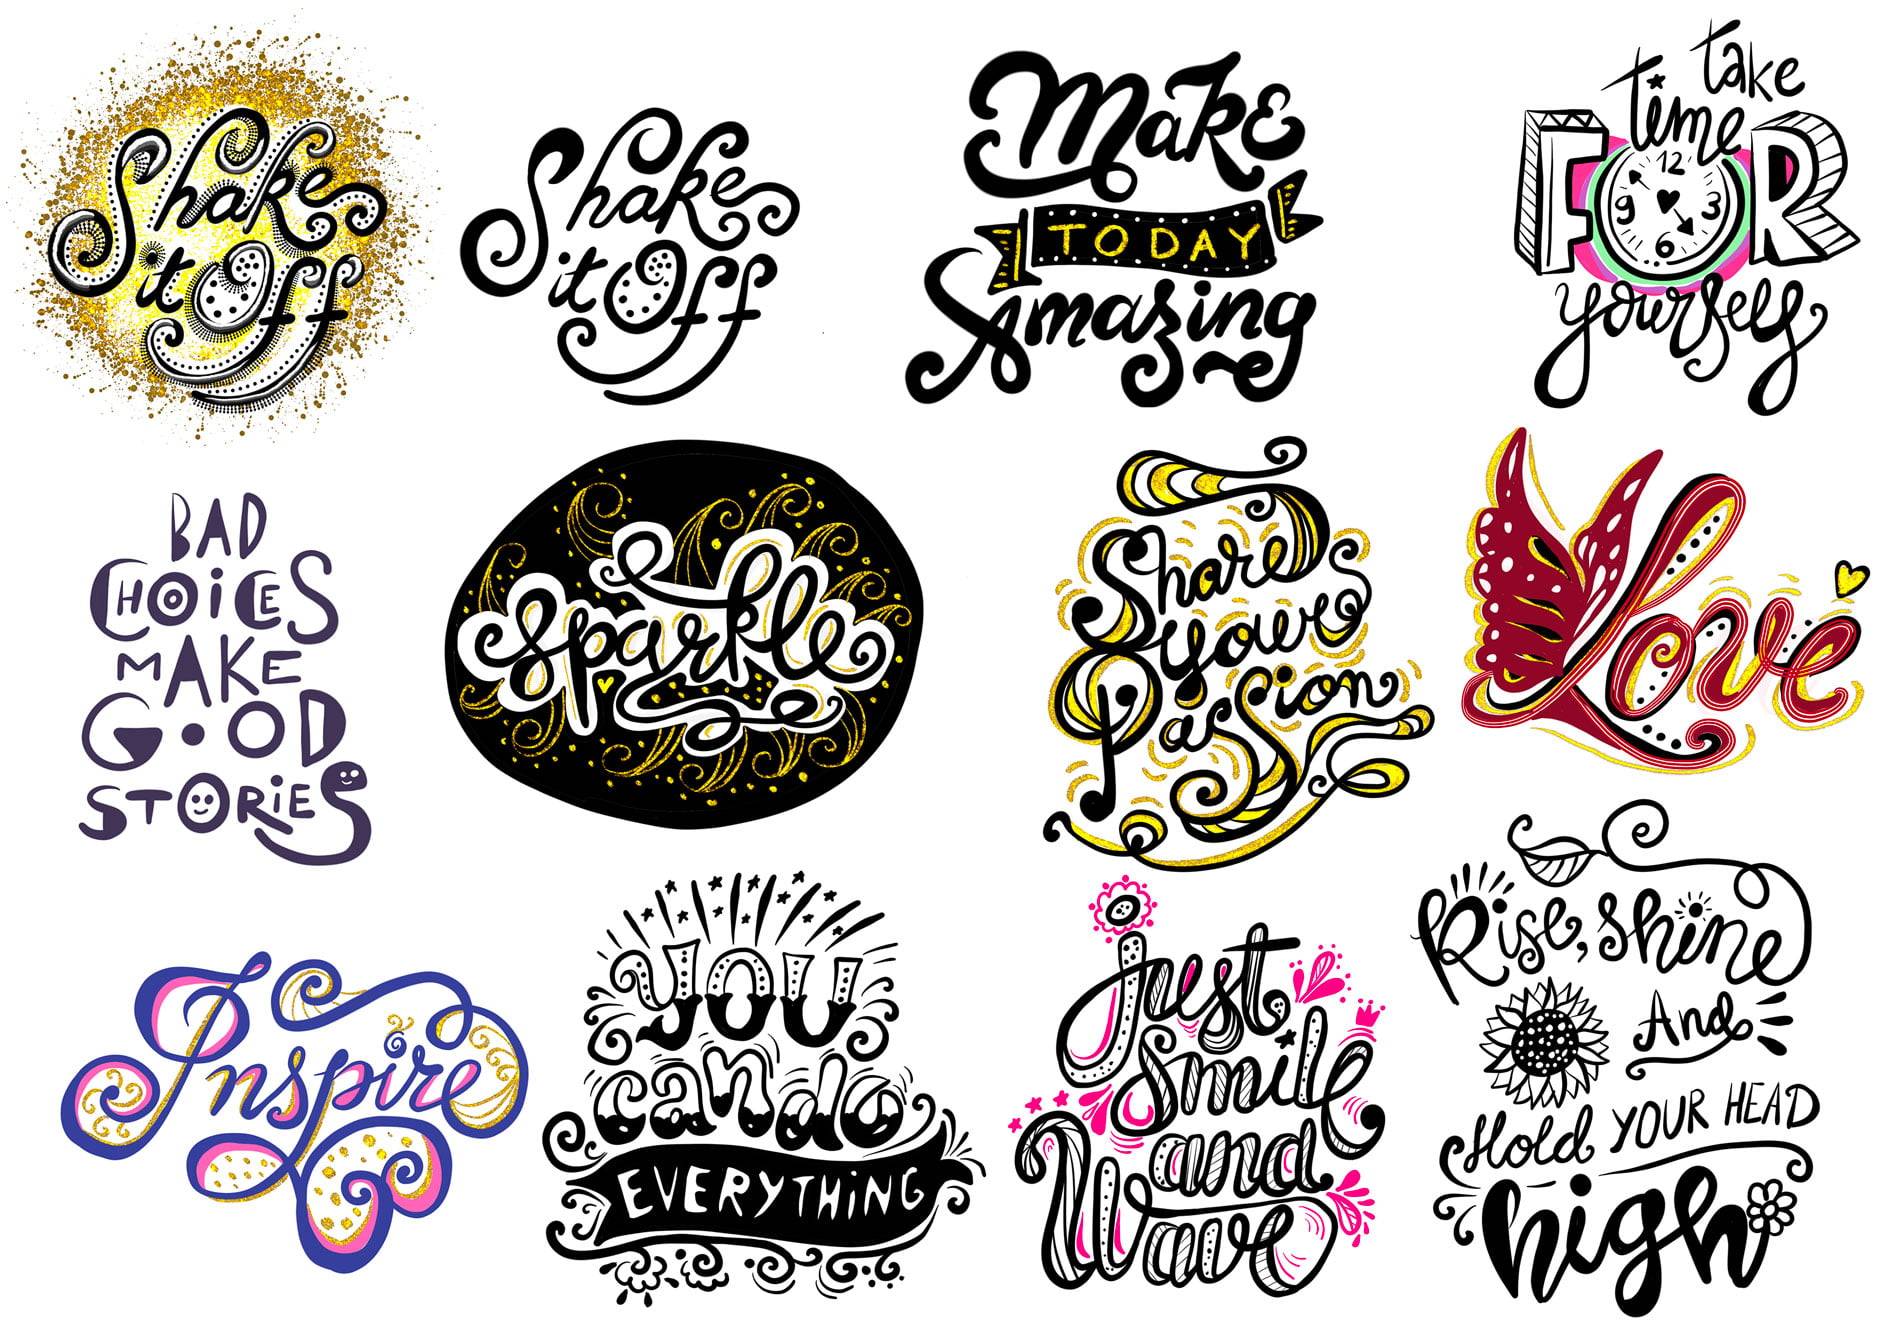 110 Helpful Lettering Guides ideas  lettering, hand lettering, lettering  fonts